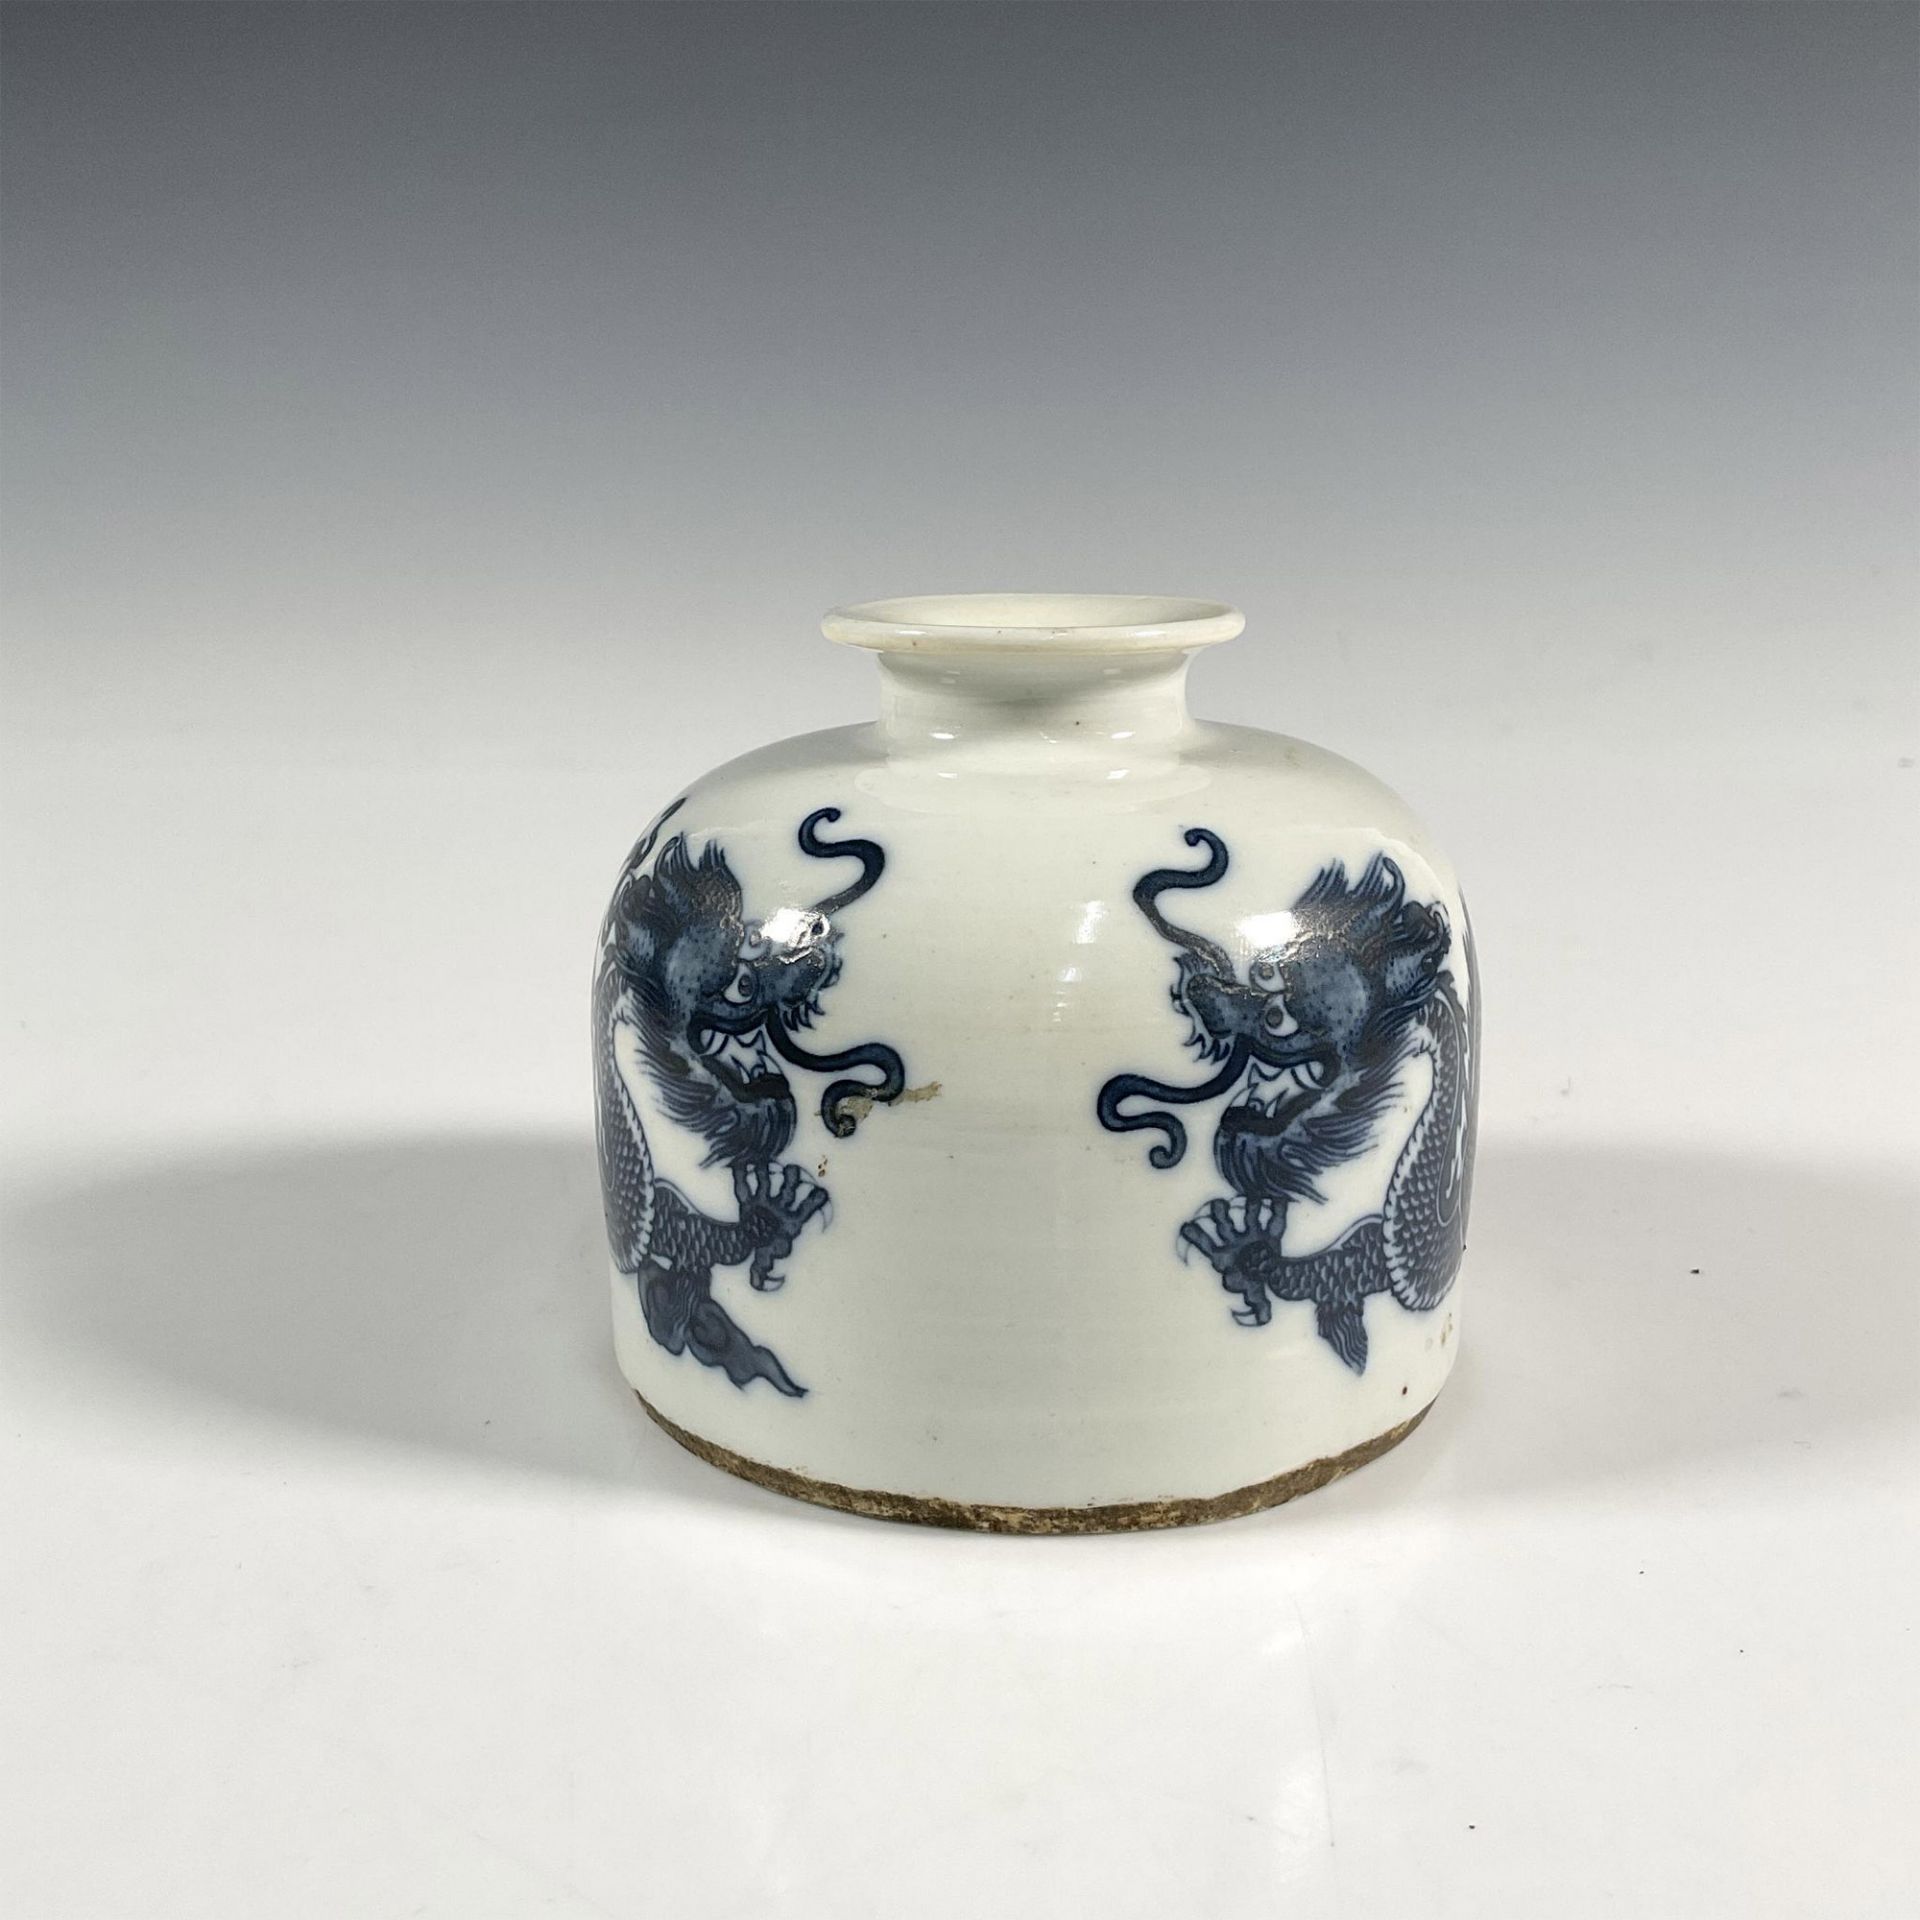 Chinese Porcelain Waterdropper or Inkwell Jingdezhen Marks - Image 2 of 3